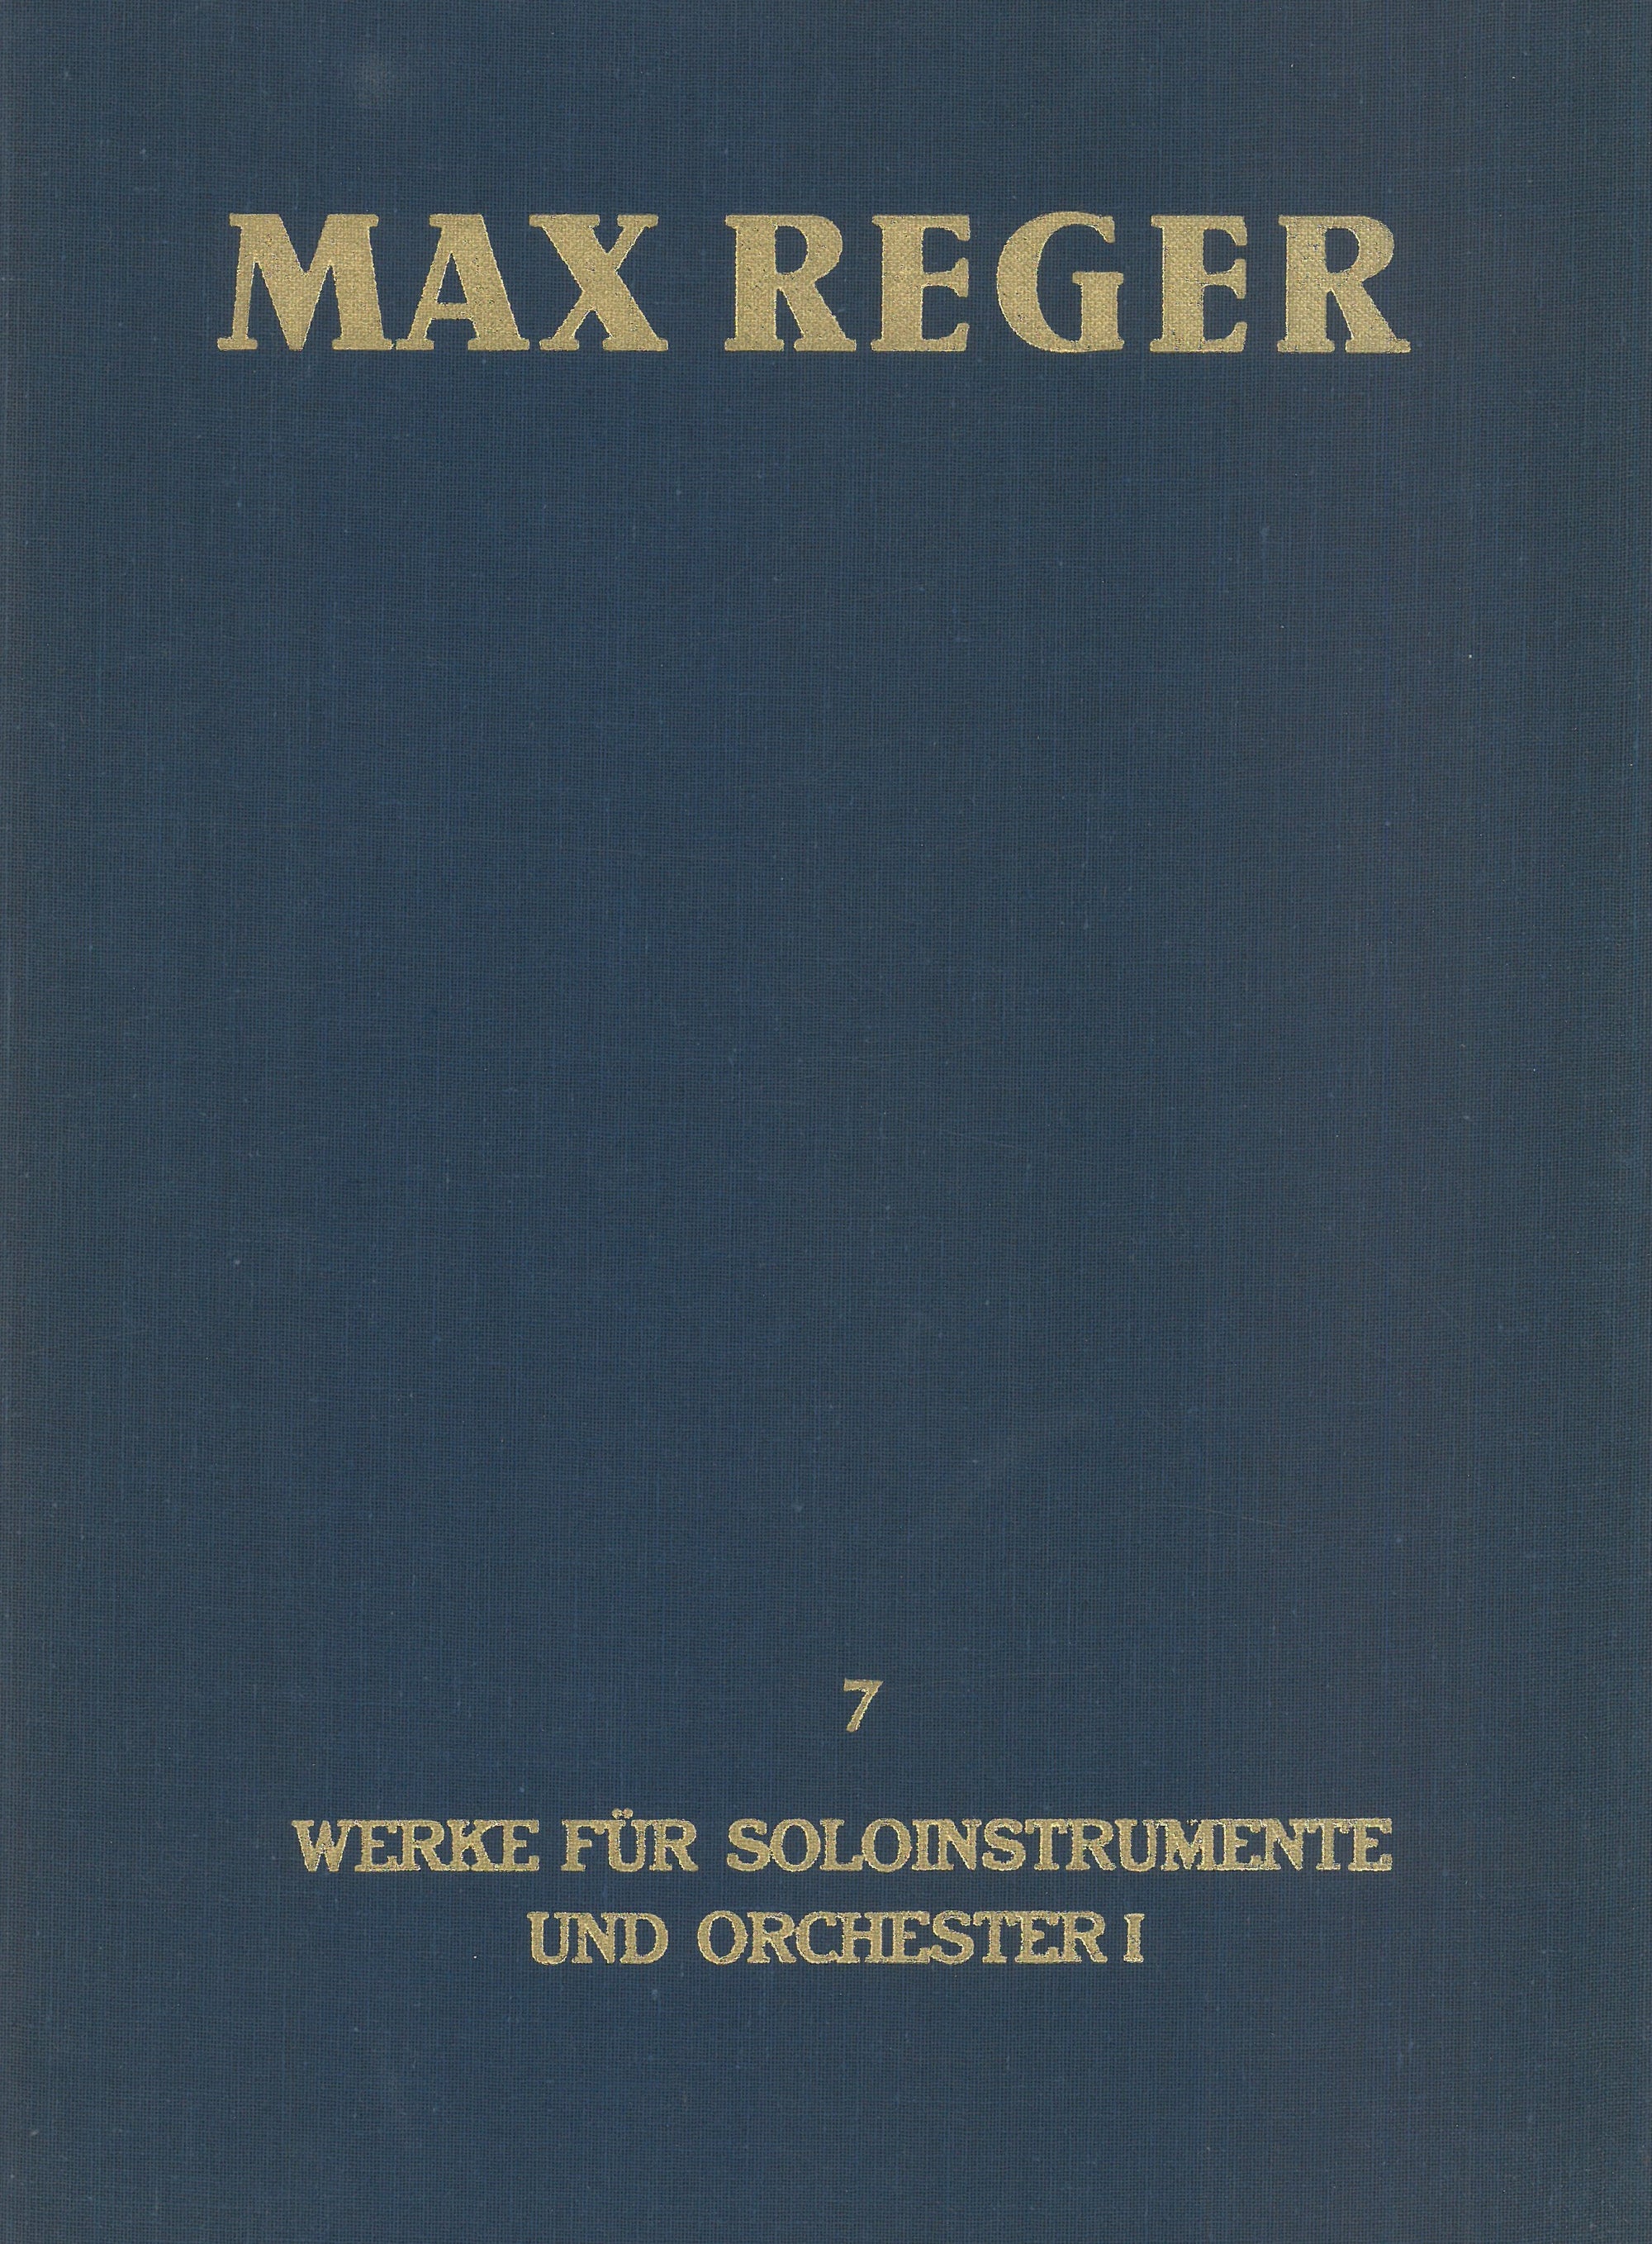 Reger: Works for Solo Instruments and Orchestra I